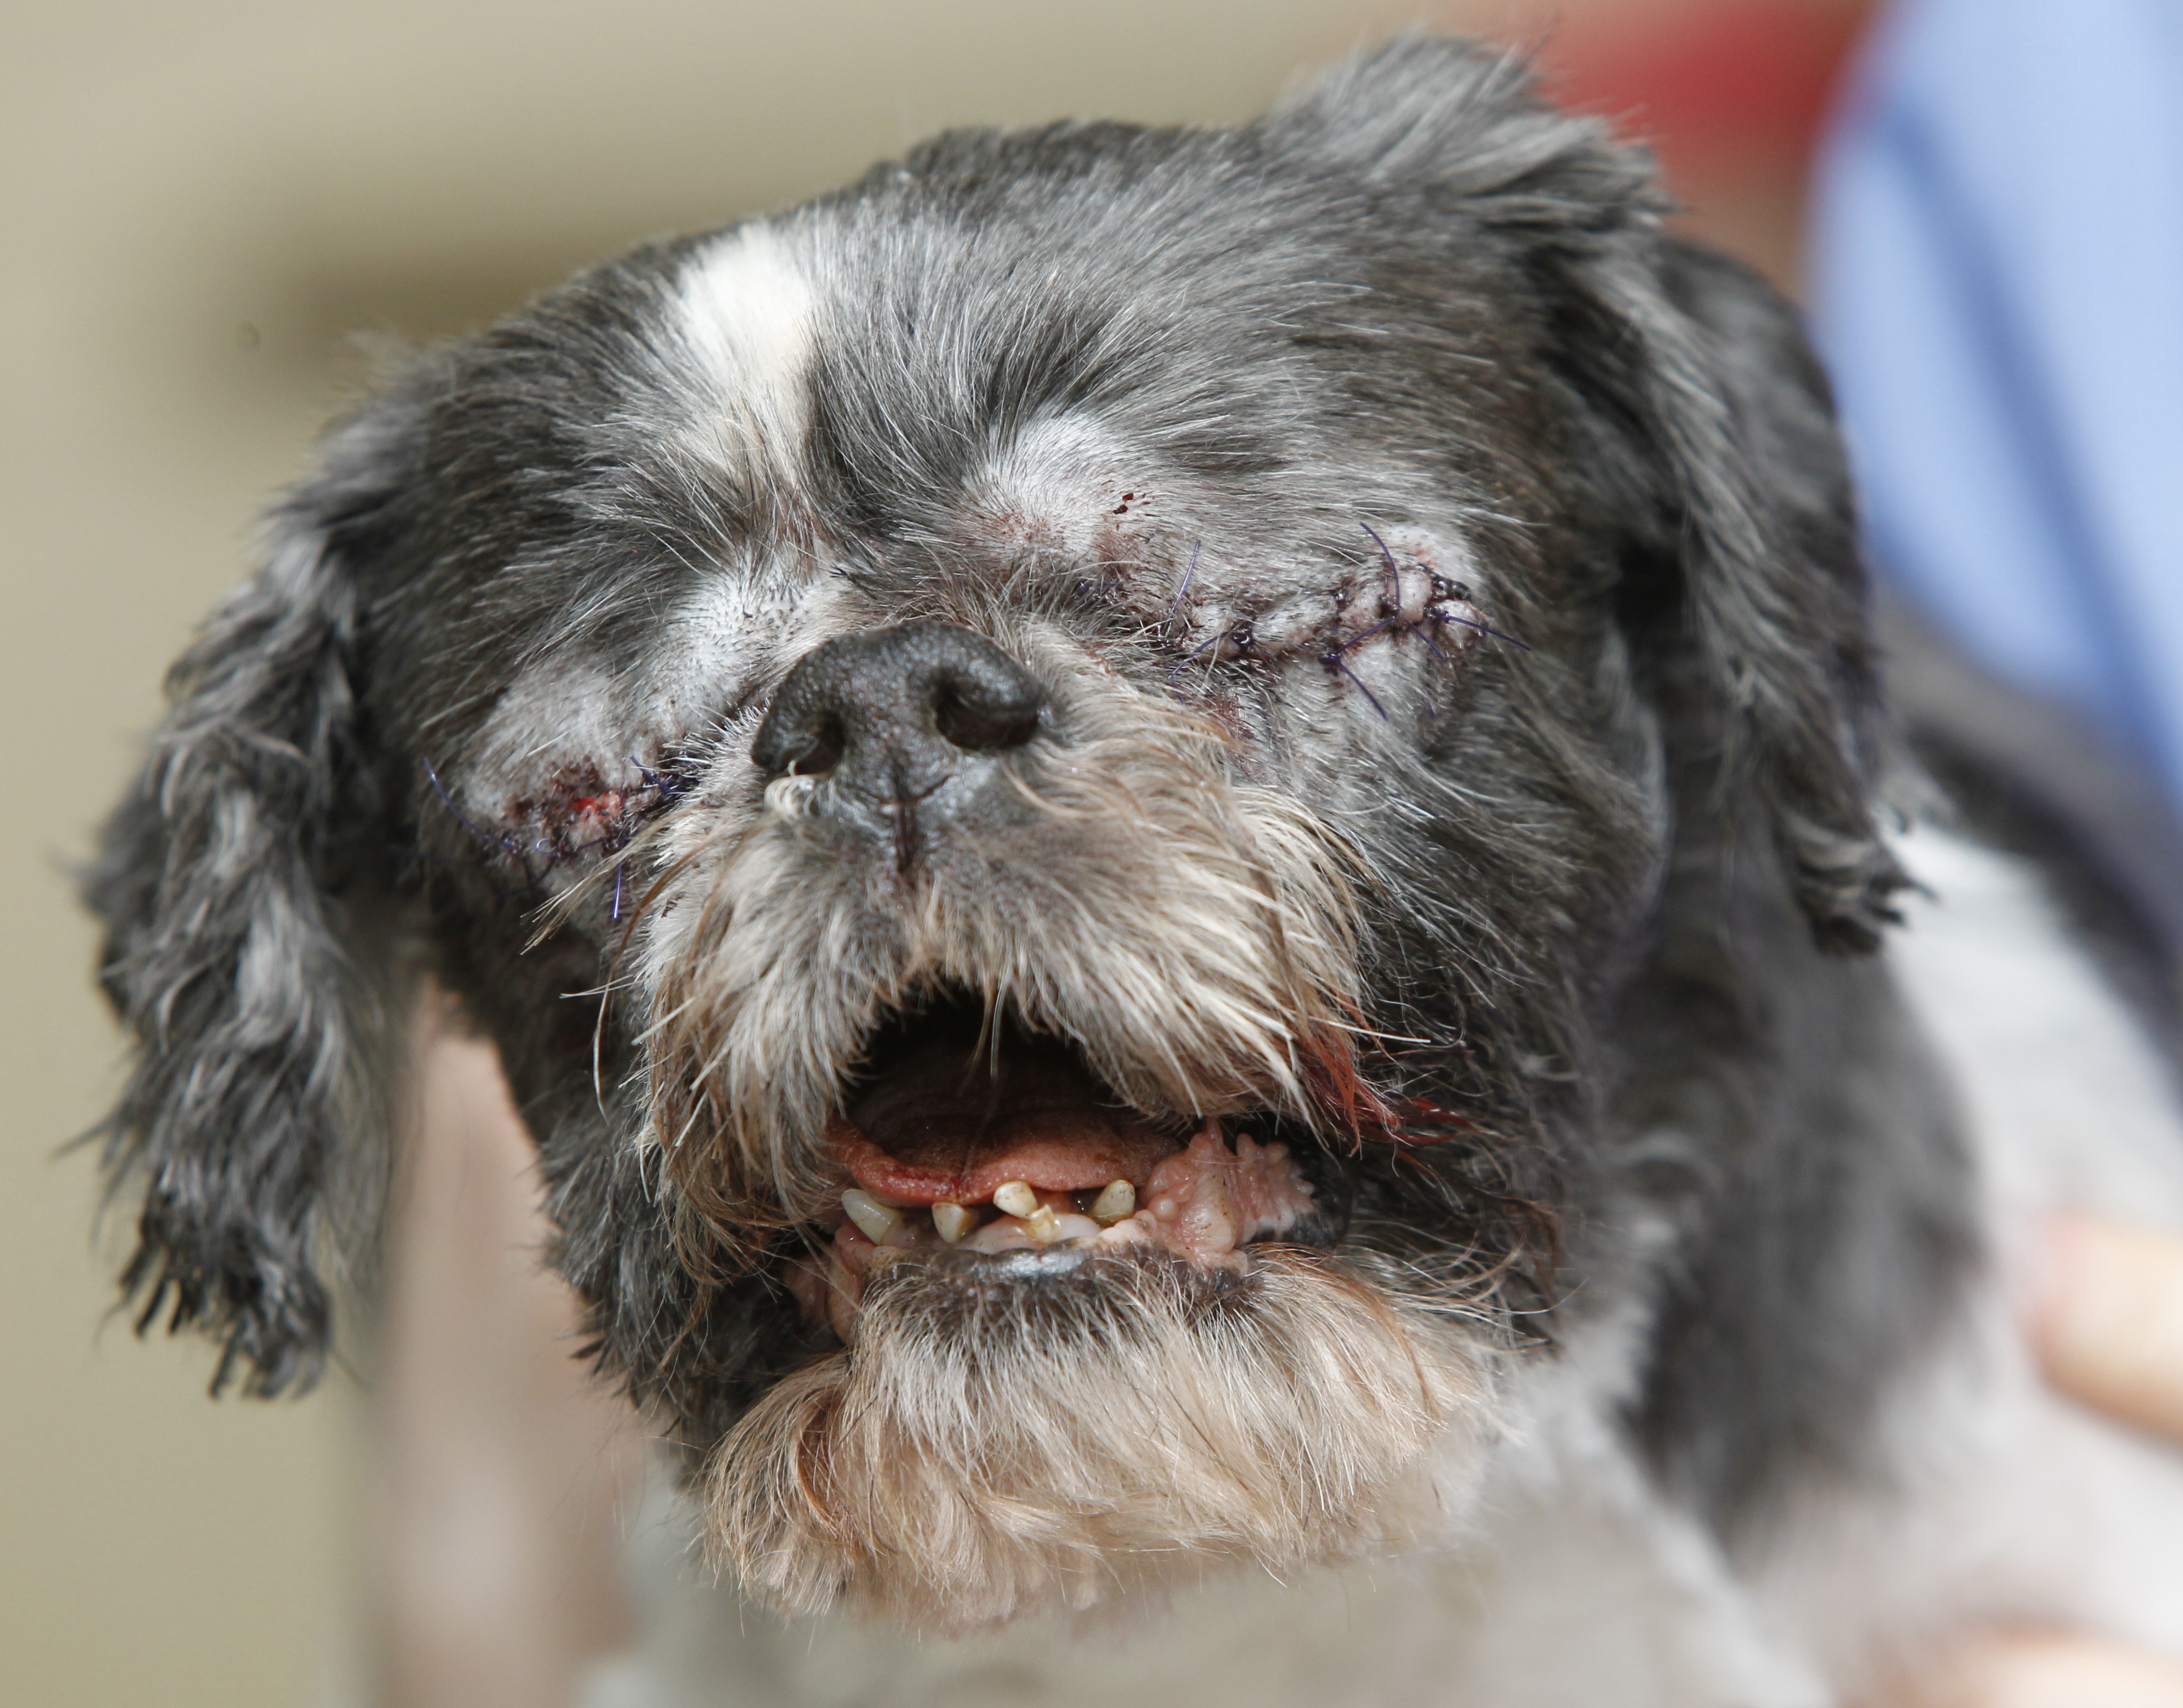 Blind Shih Tzu Stevie has eye treated for infections - The ...